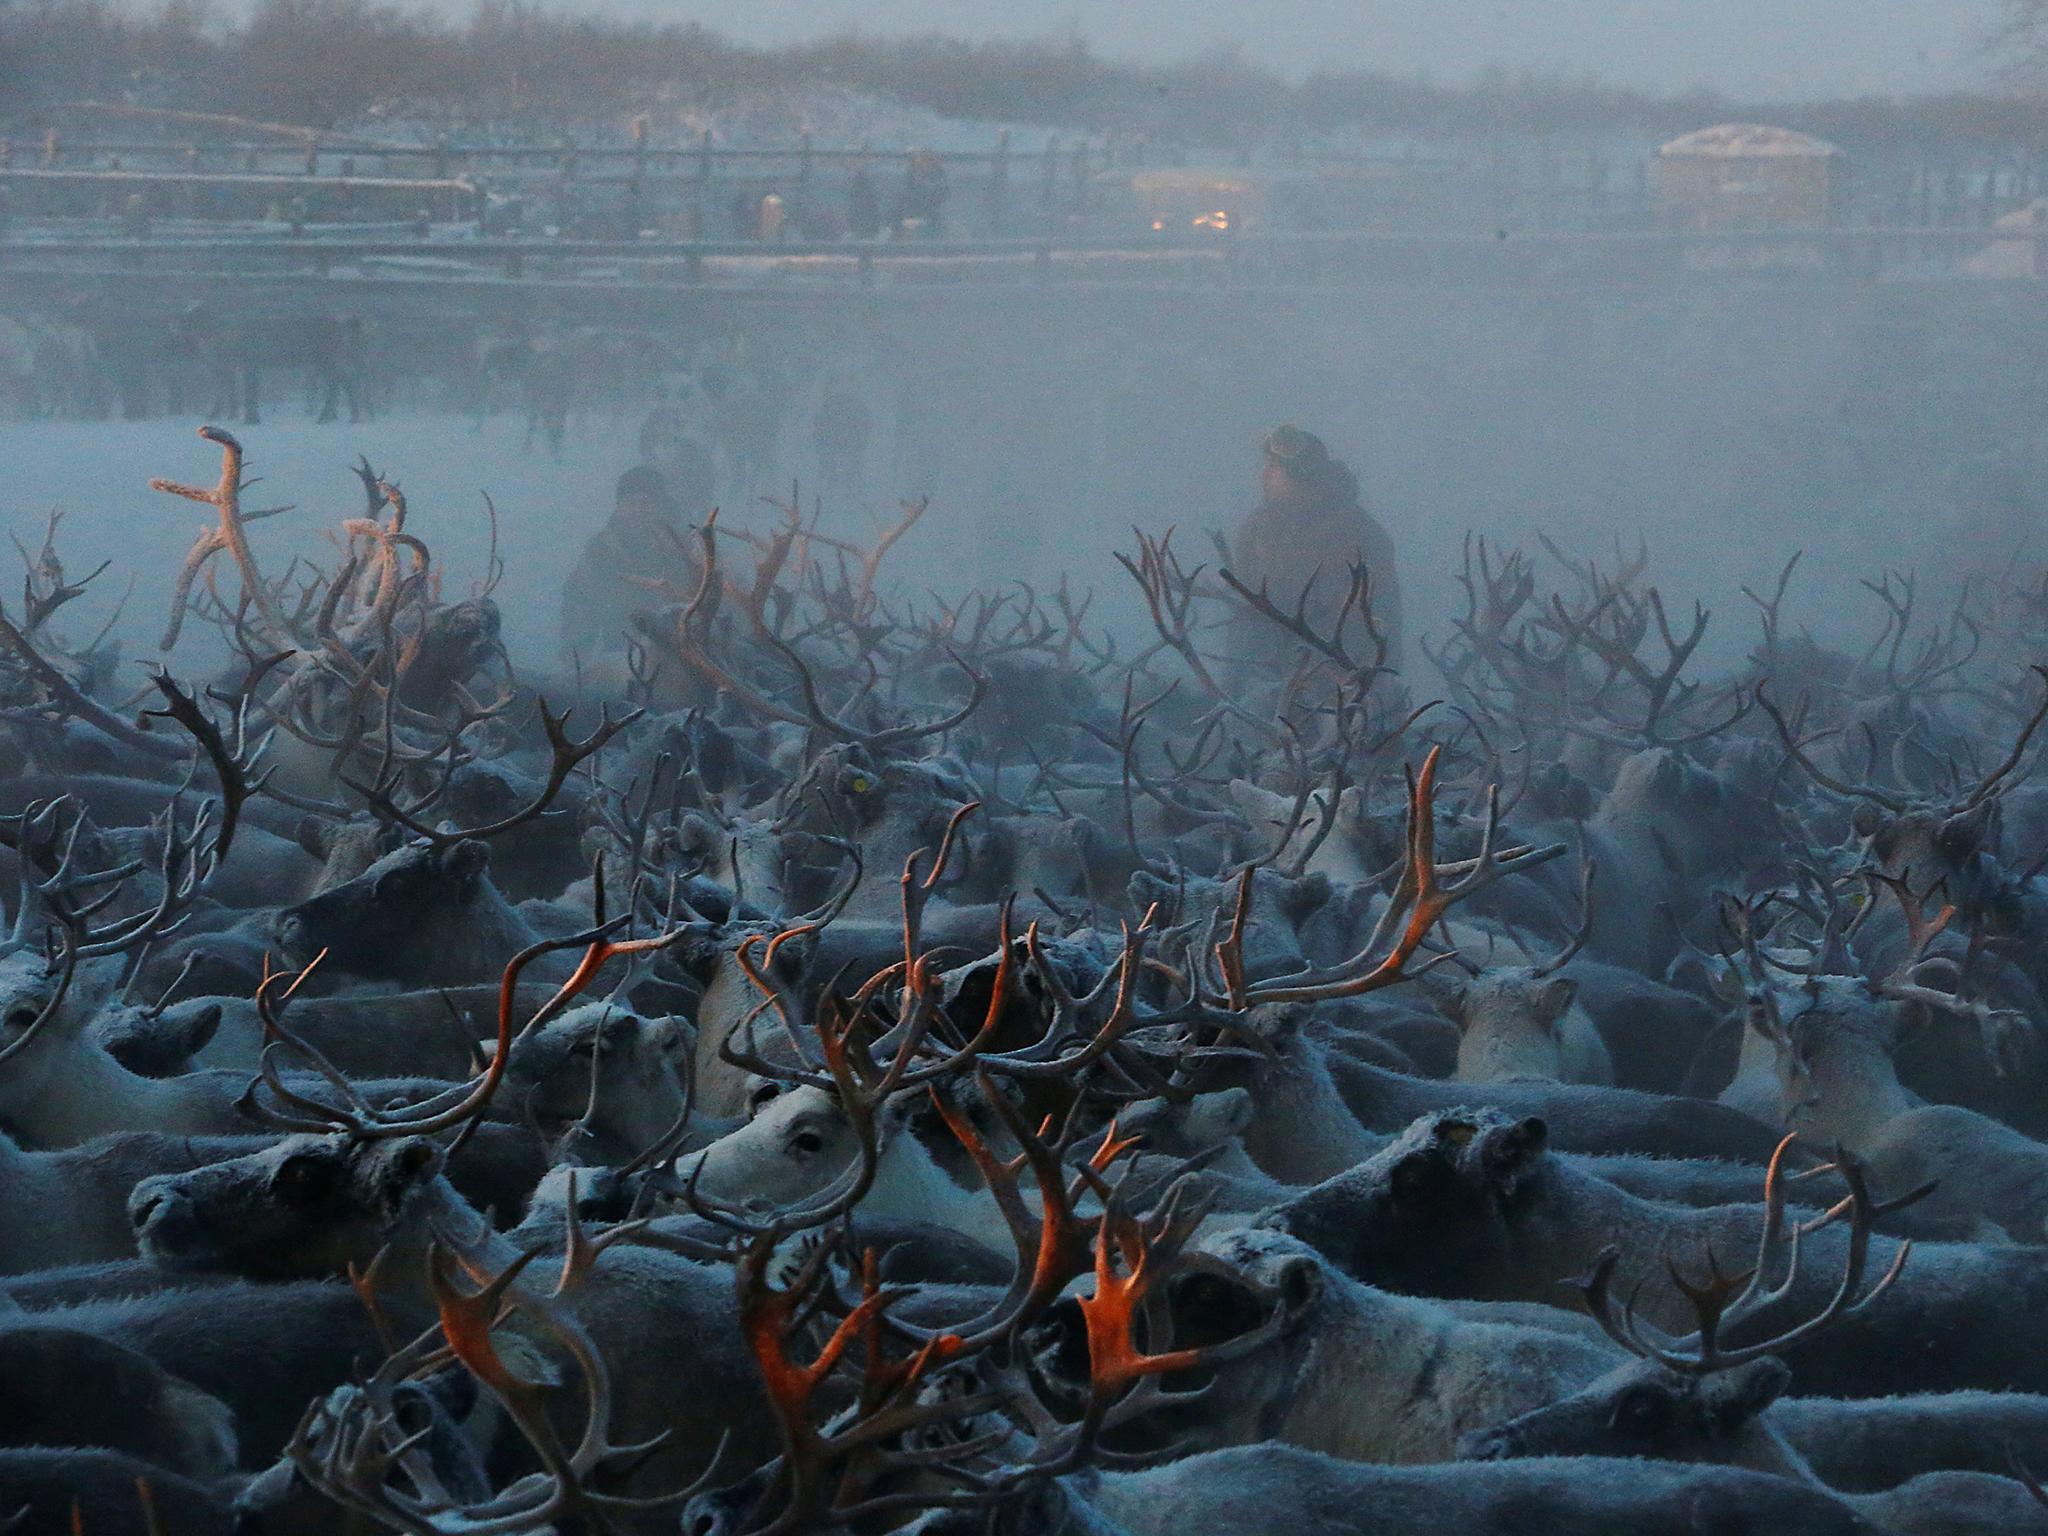 Herders select and sort reindeer inside the enclosure in the settlement of Krasnoye in Nenets Autonomous District, Russia